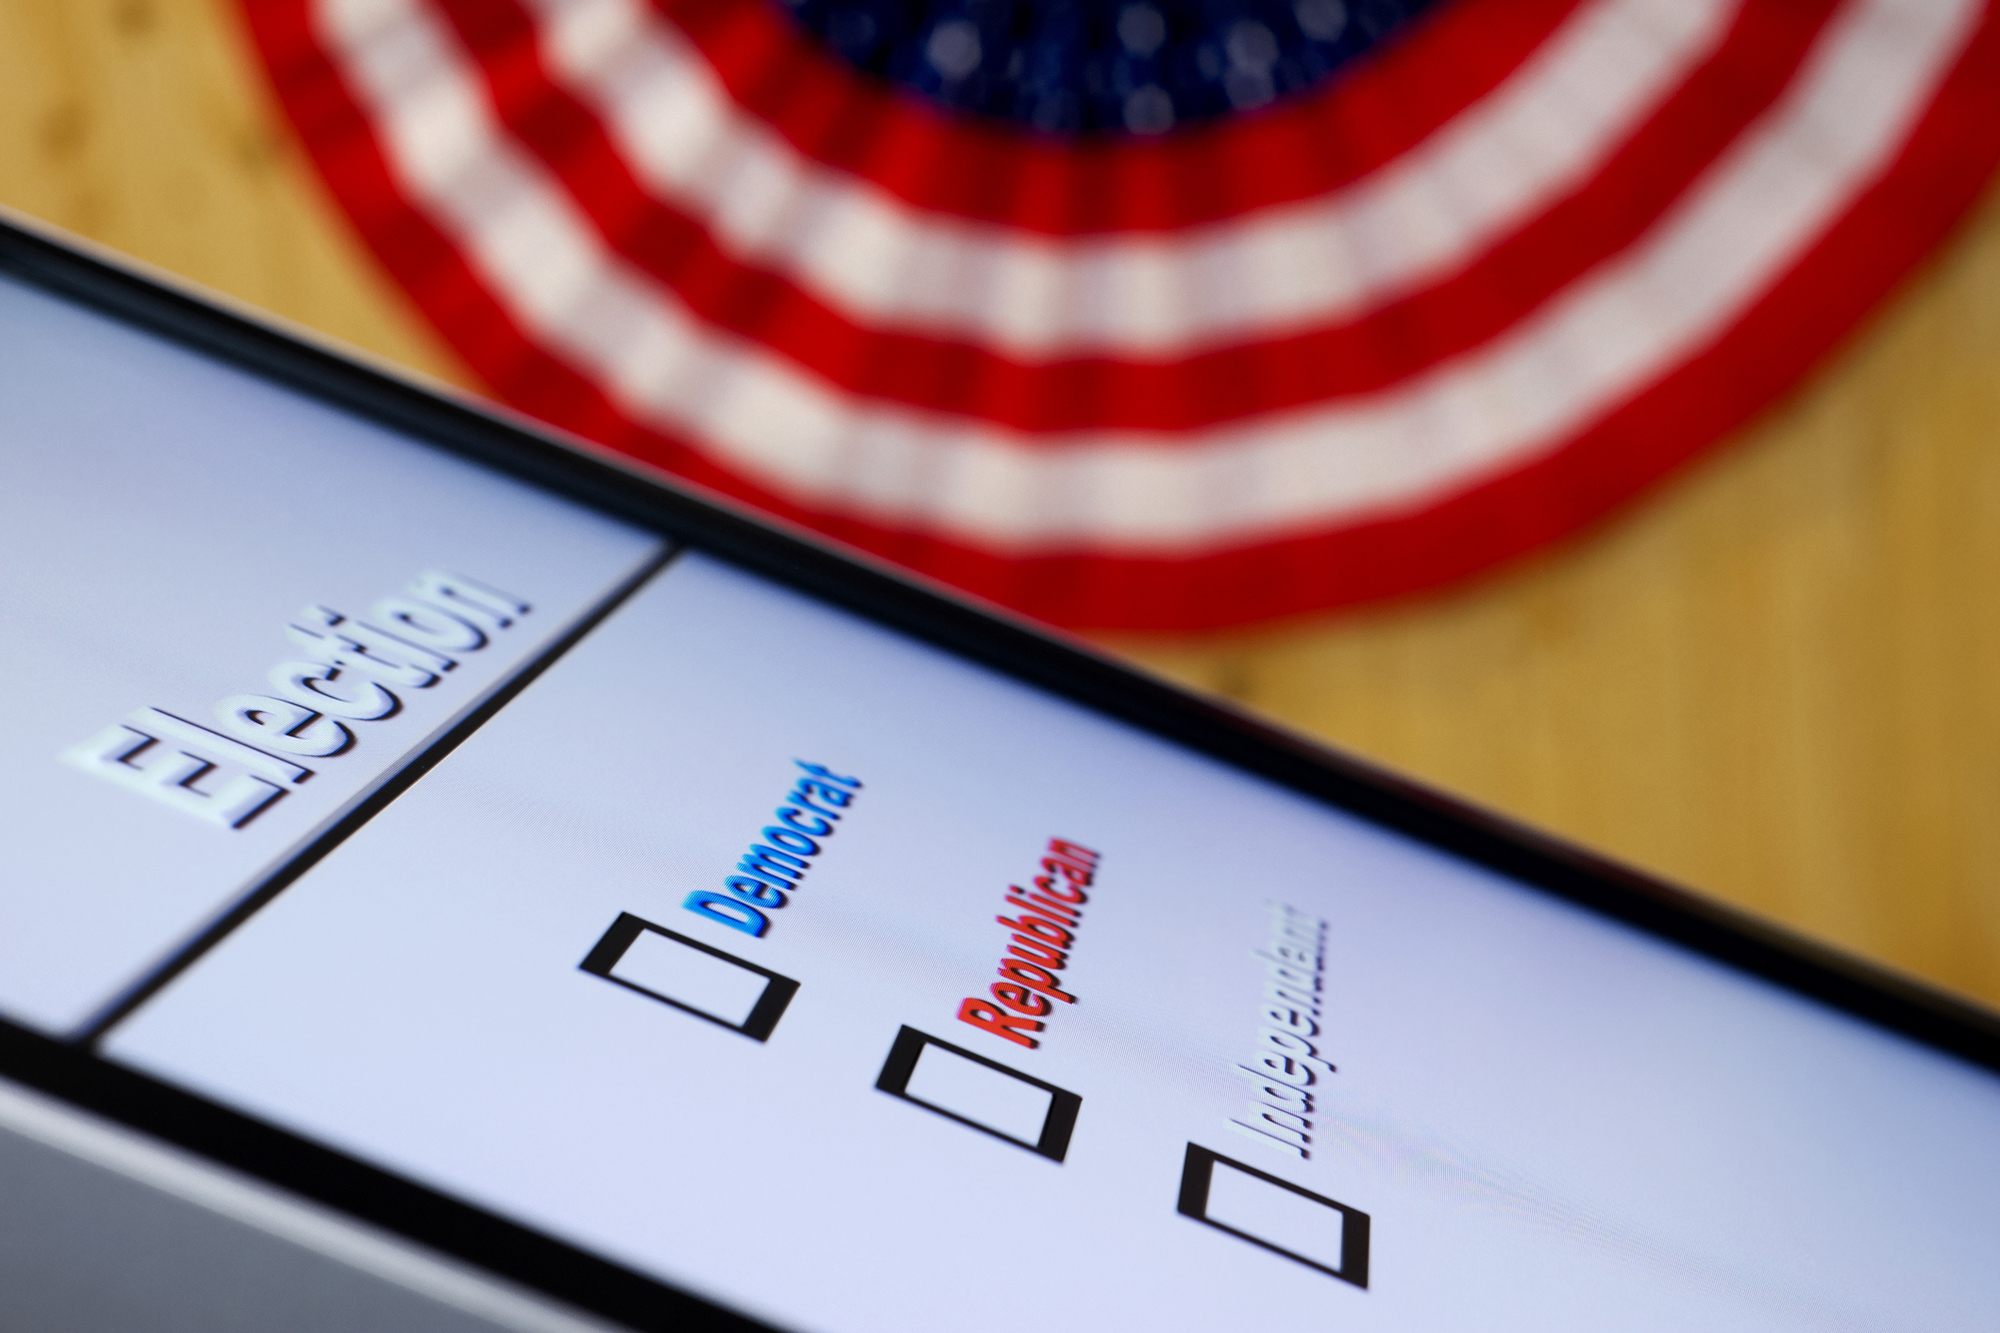 Electronic Voting. (cmannphoto/Getty Images)